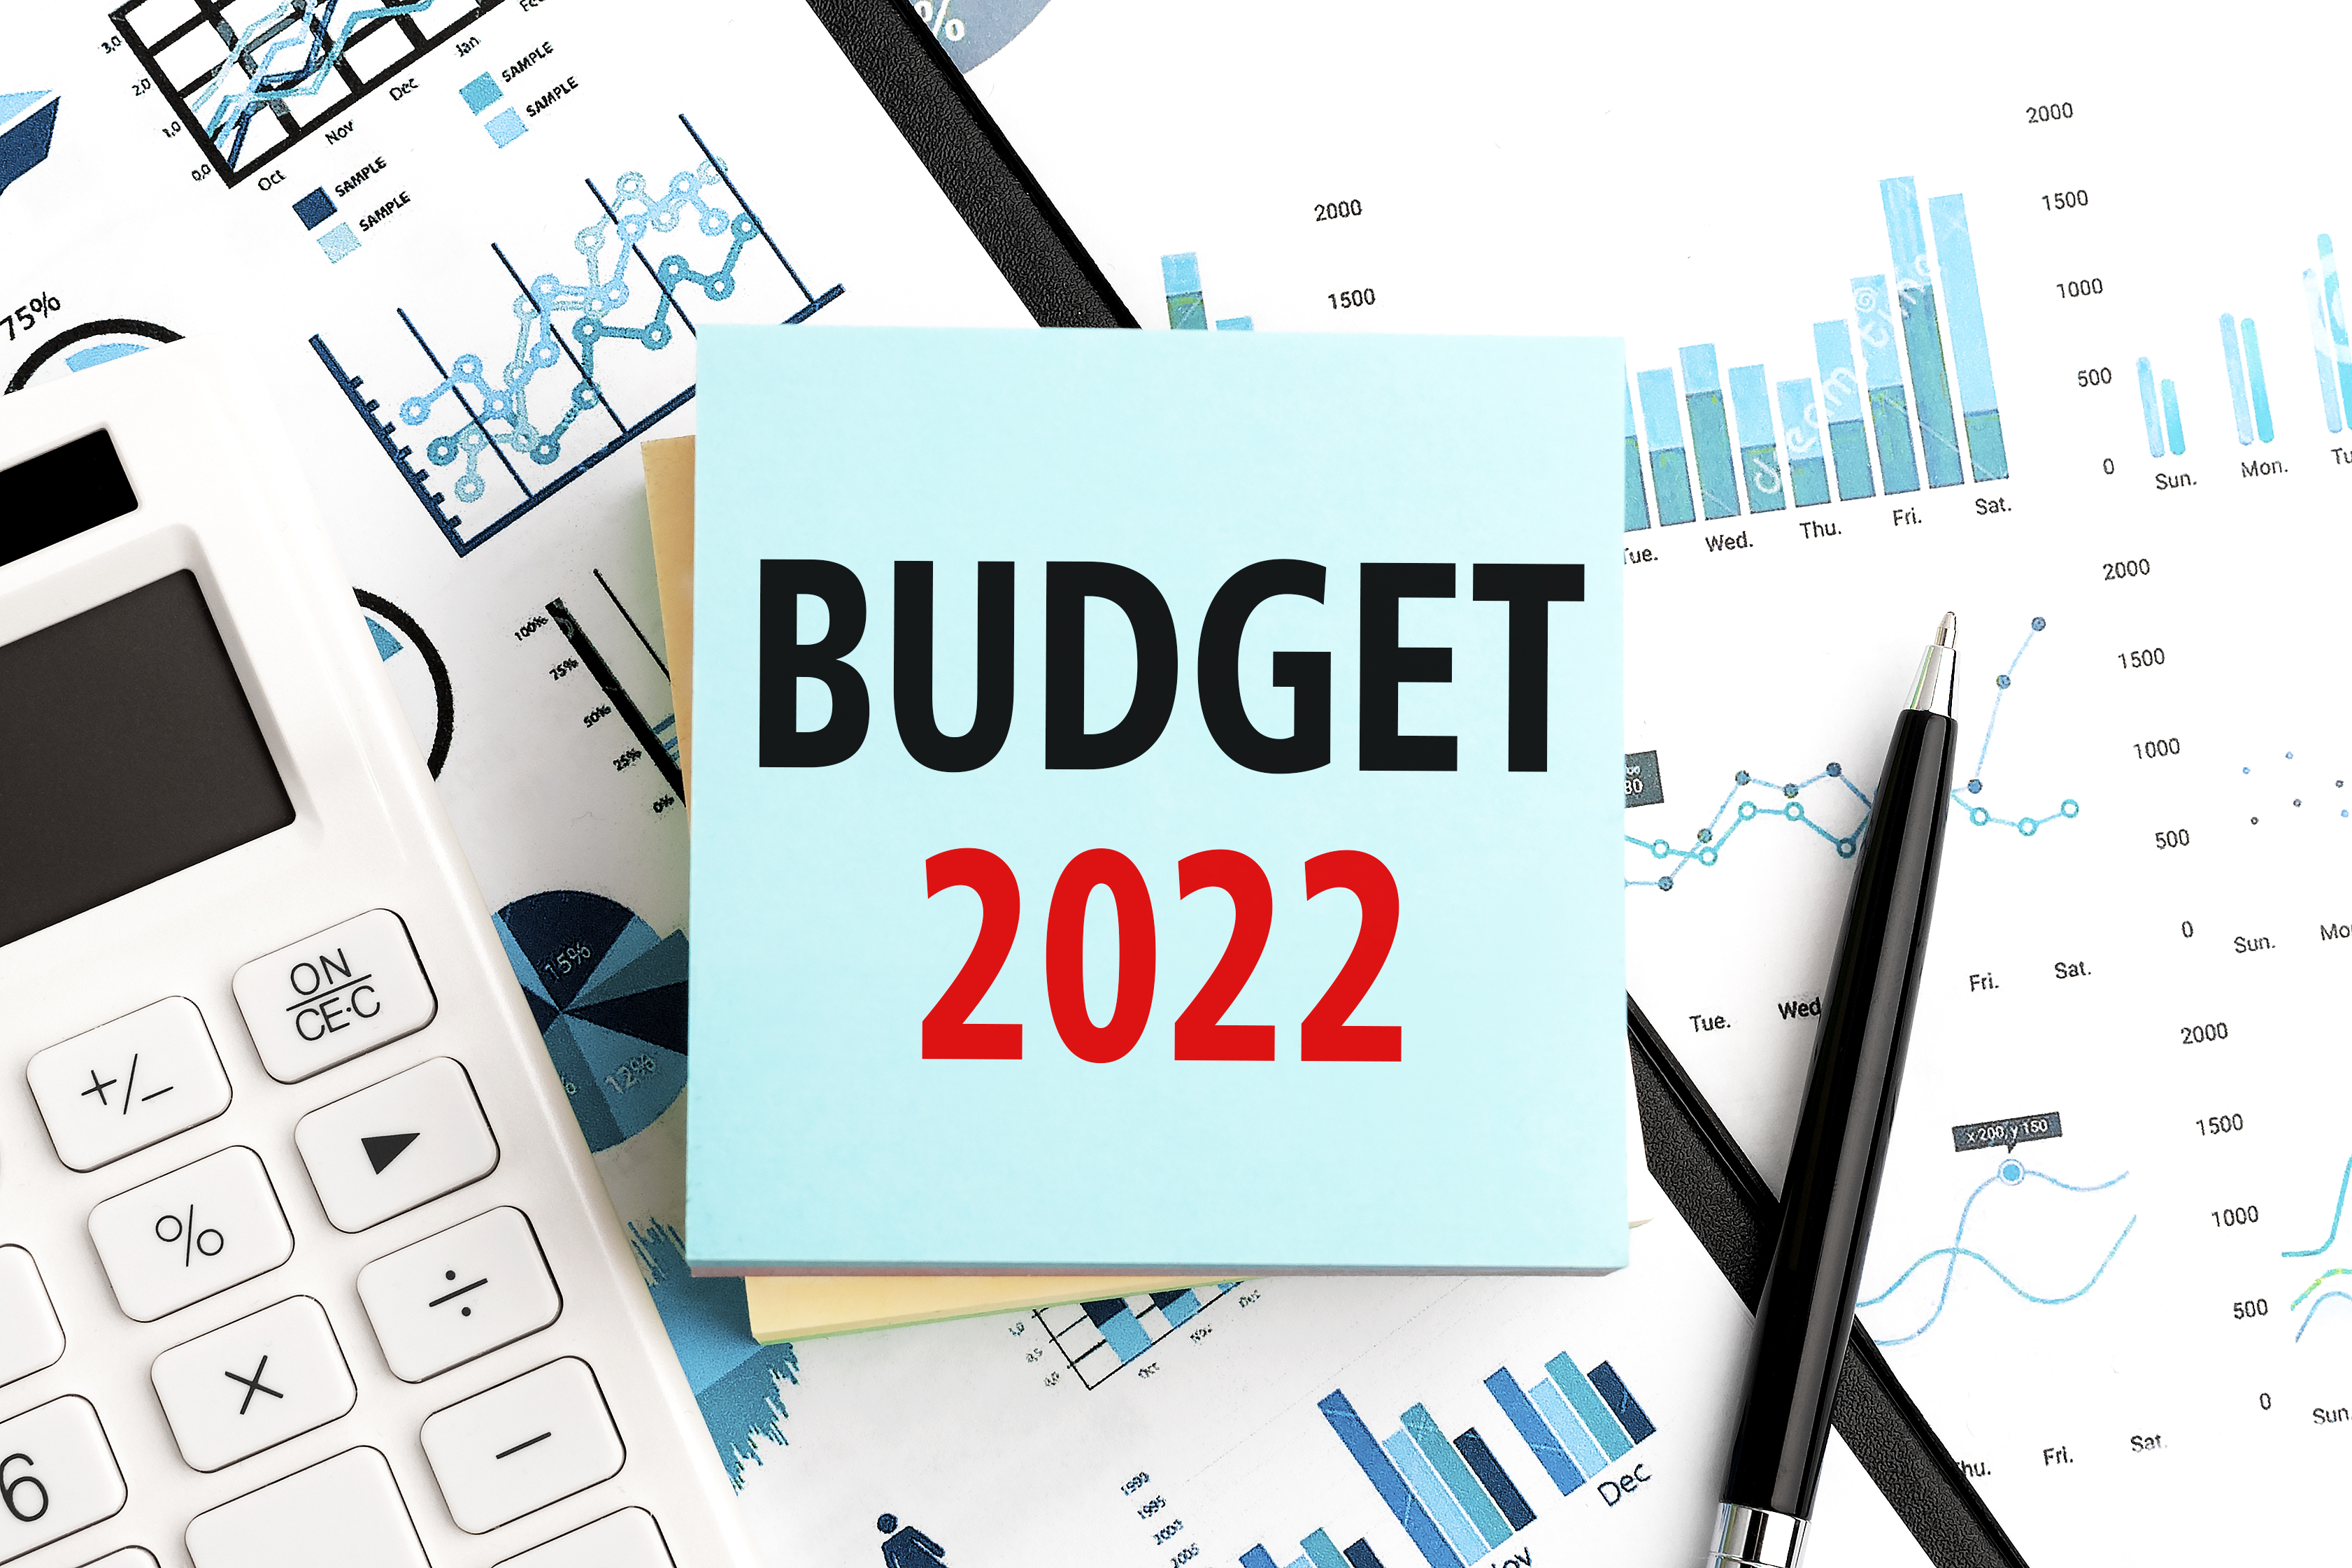 office supplies, calculator, financial papers, with notepad reading 'Budget 2022'